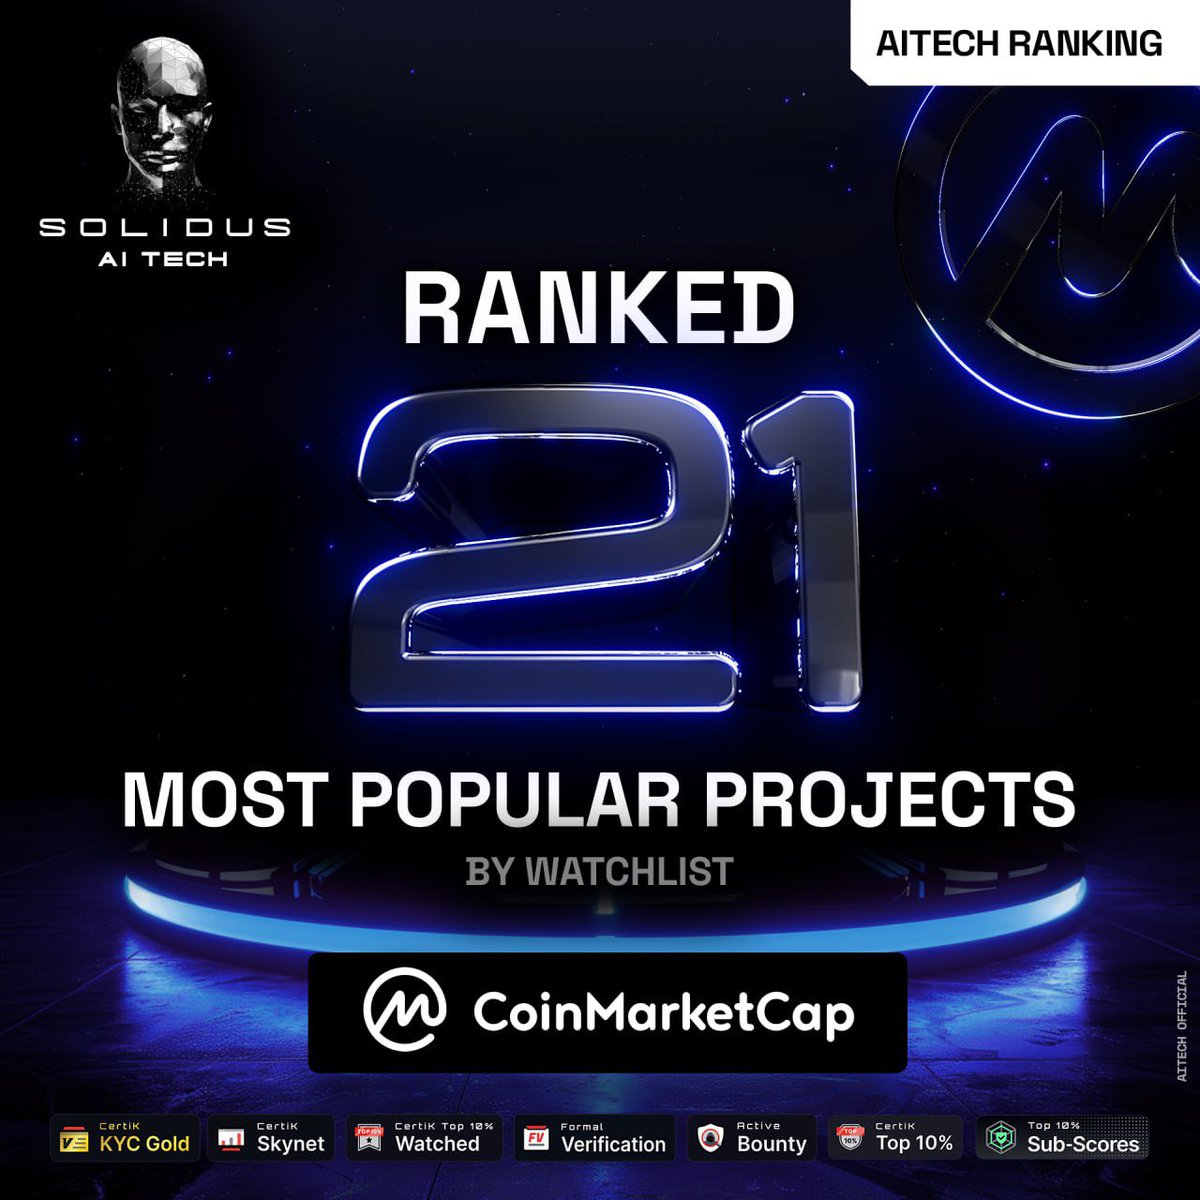 🔥 AITECH Ranks 21st in CoinMarketCap's Most Popular Projects! 🎉 We are thrilled to announce that AITECH has hit 21st place on CoinMarketCap's Most Popular Projects, showcasing our growing presence in the crypto space.